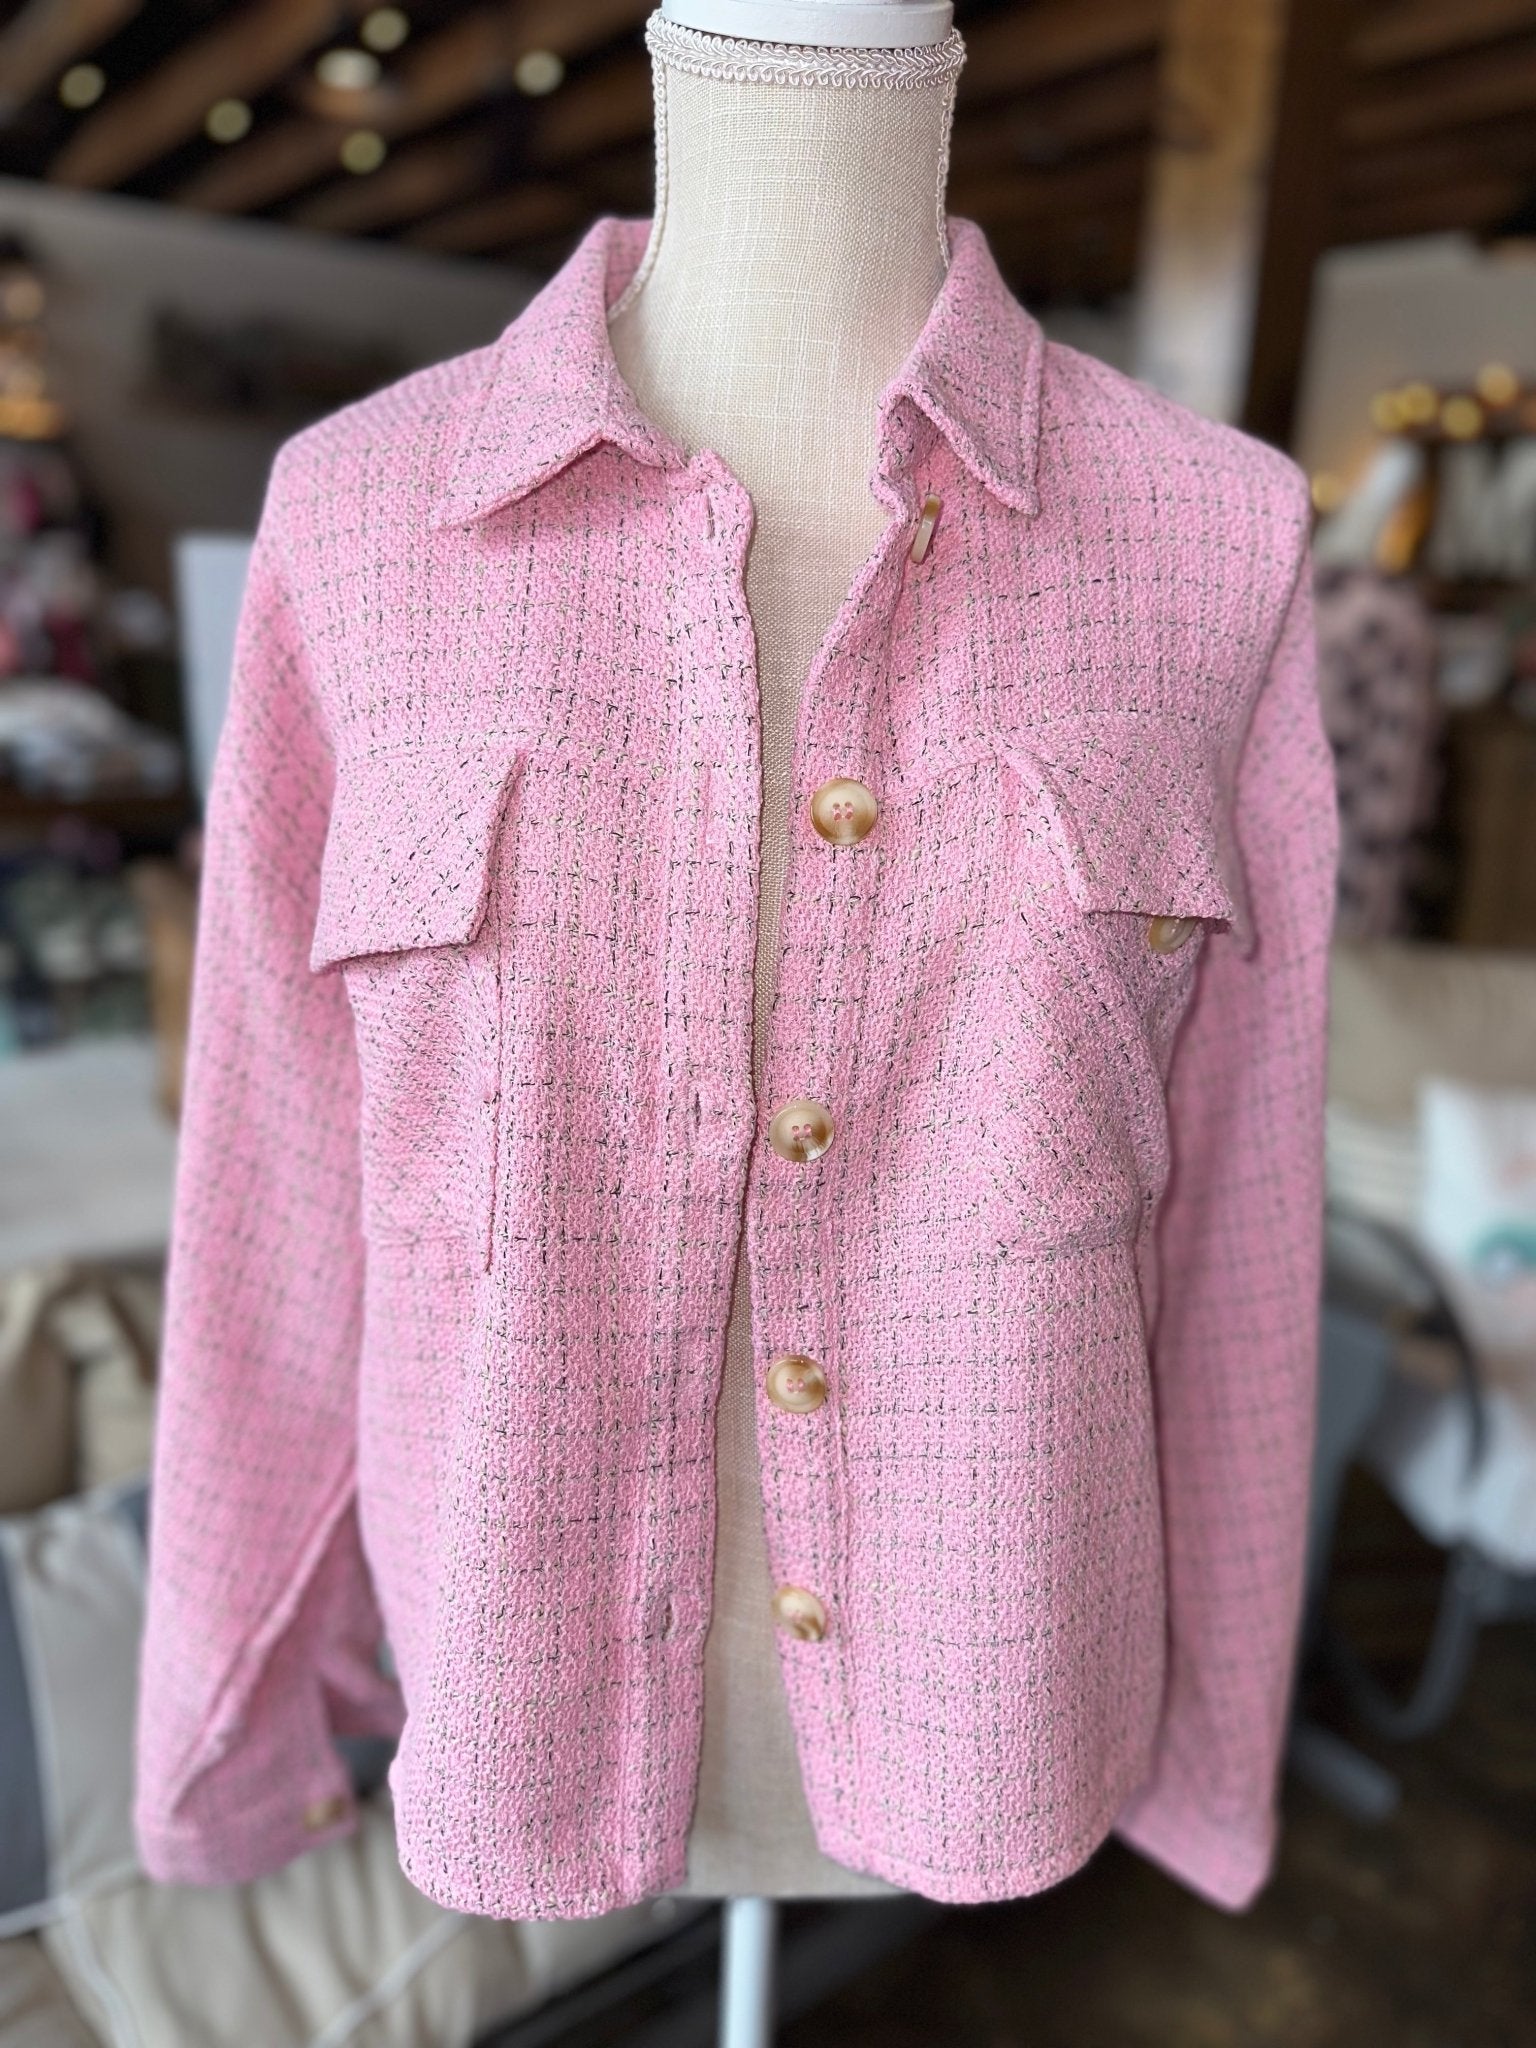 Pink Plaid Button Up Shacket - Mercantile213